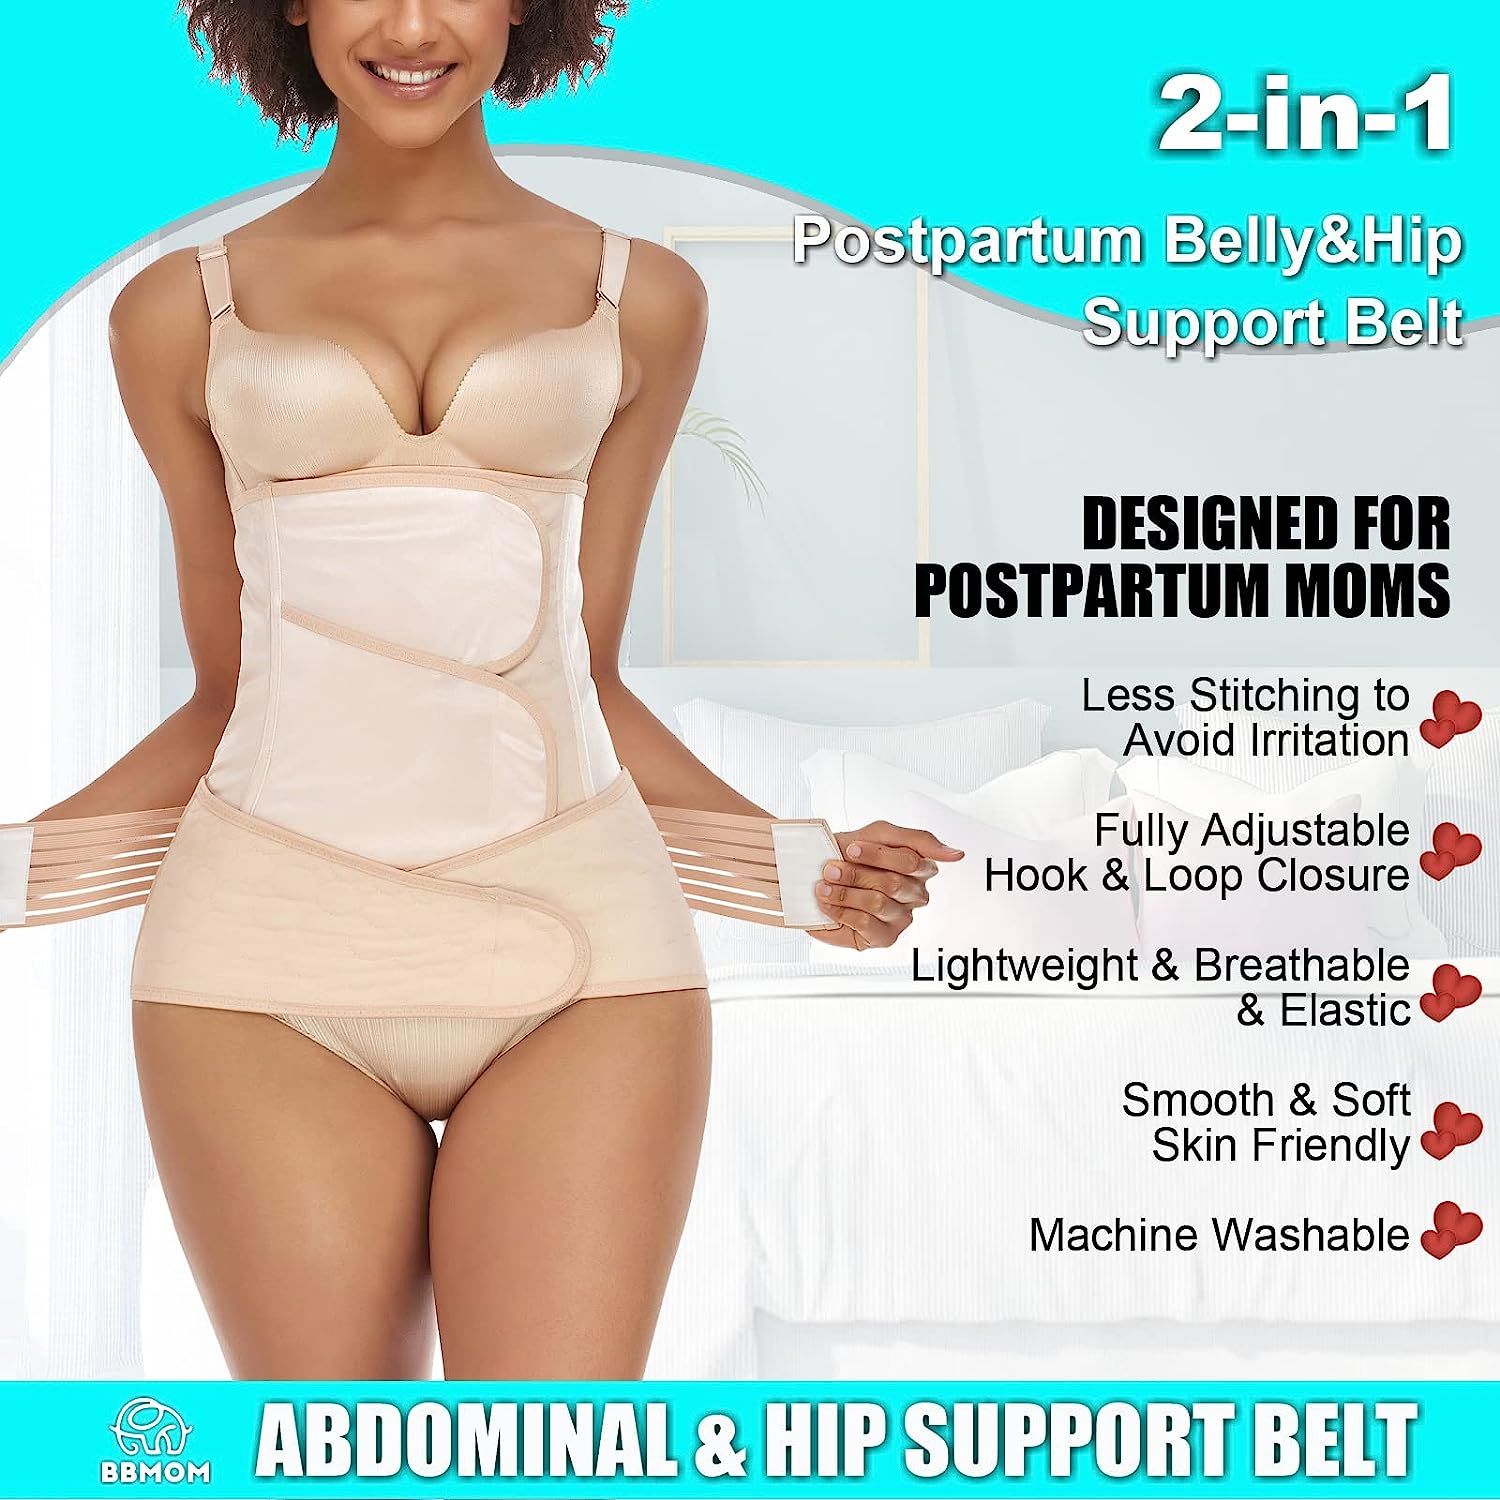 Postpartum Belly Band Abdominal Binder Post Surgery Wrap Recovery